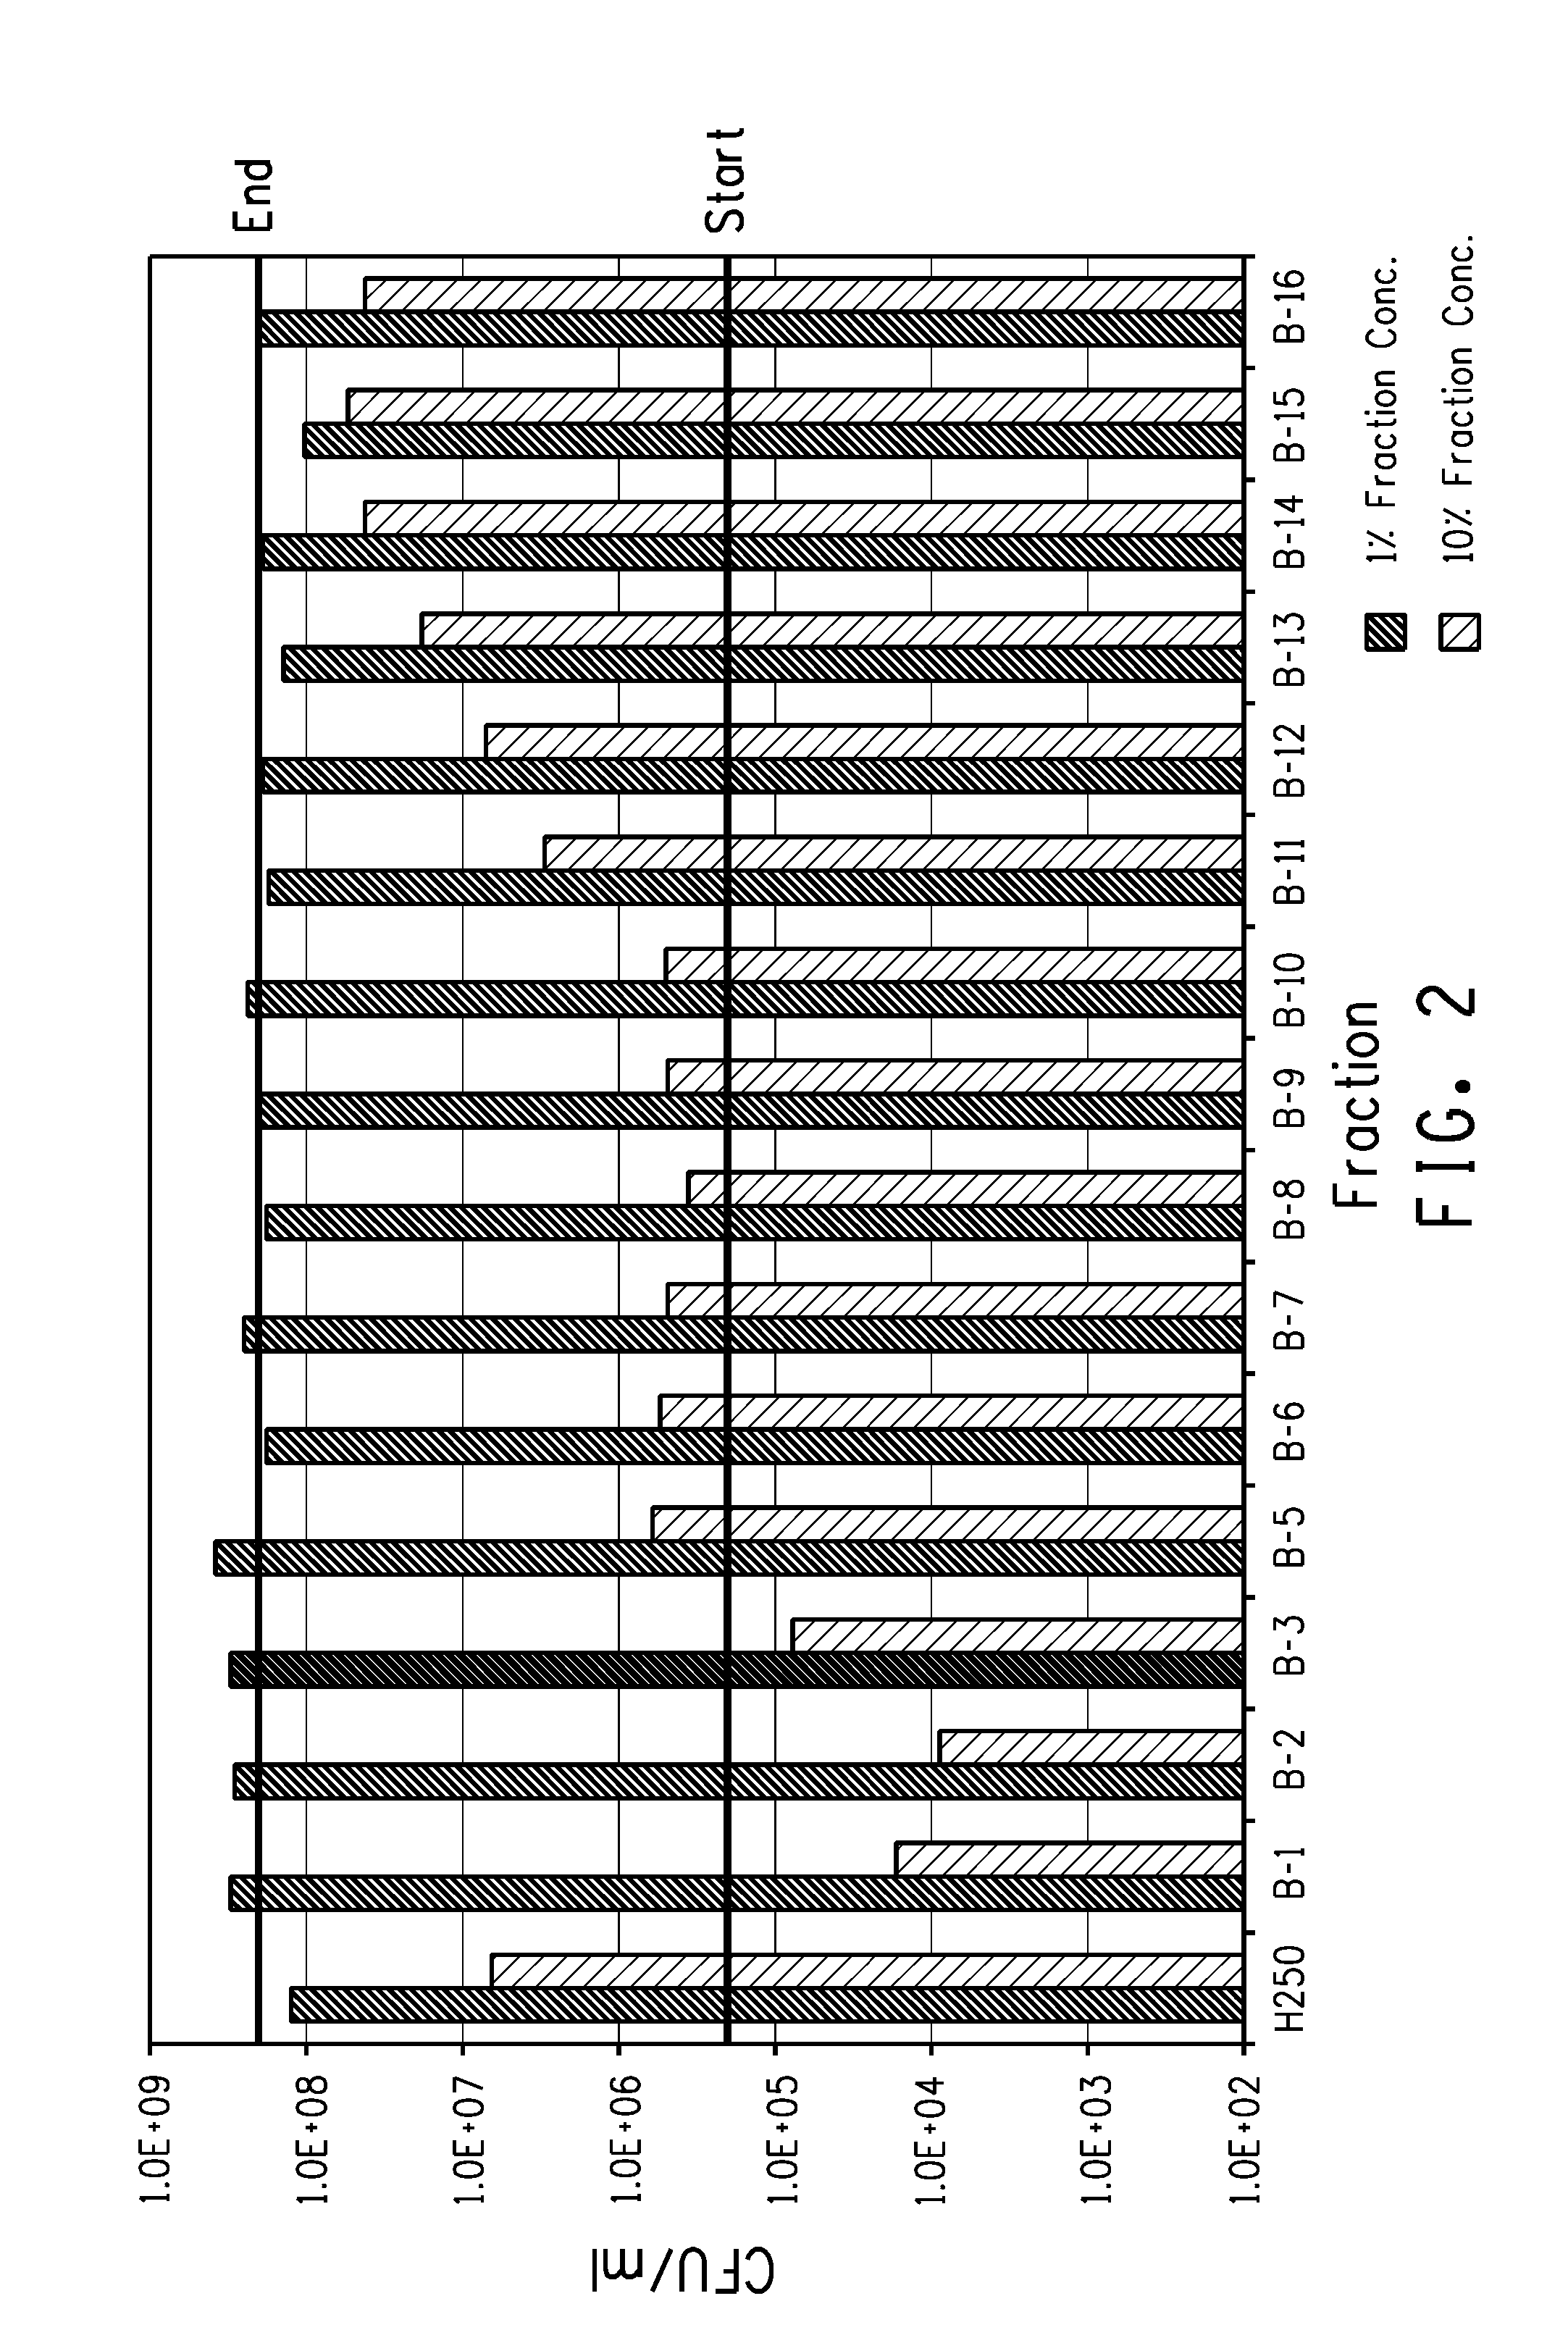 Antimicrobial compositions comprising trimethylene glycol oligomer and methods of using the compositions